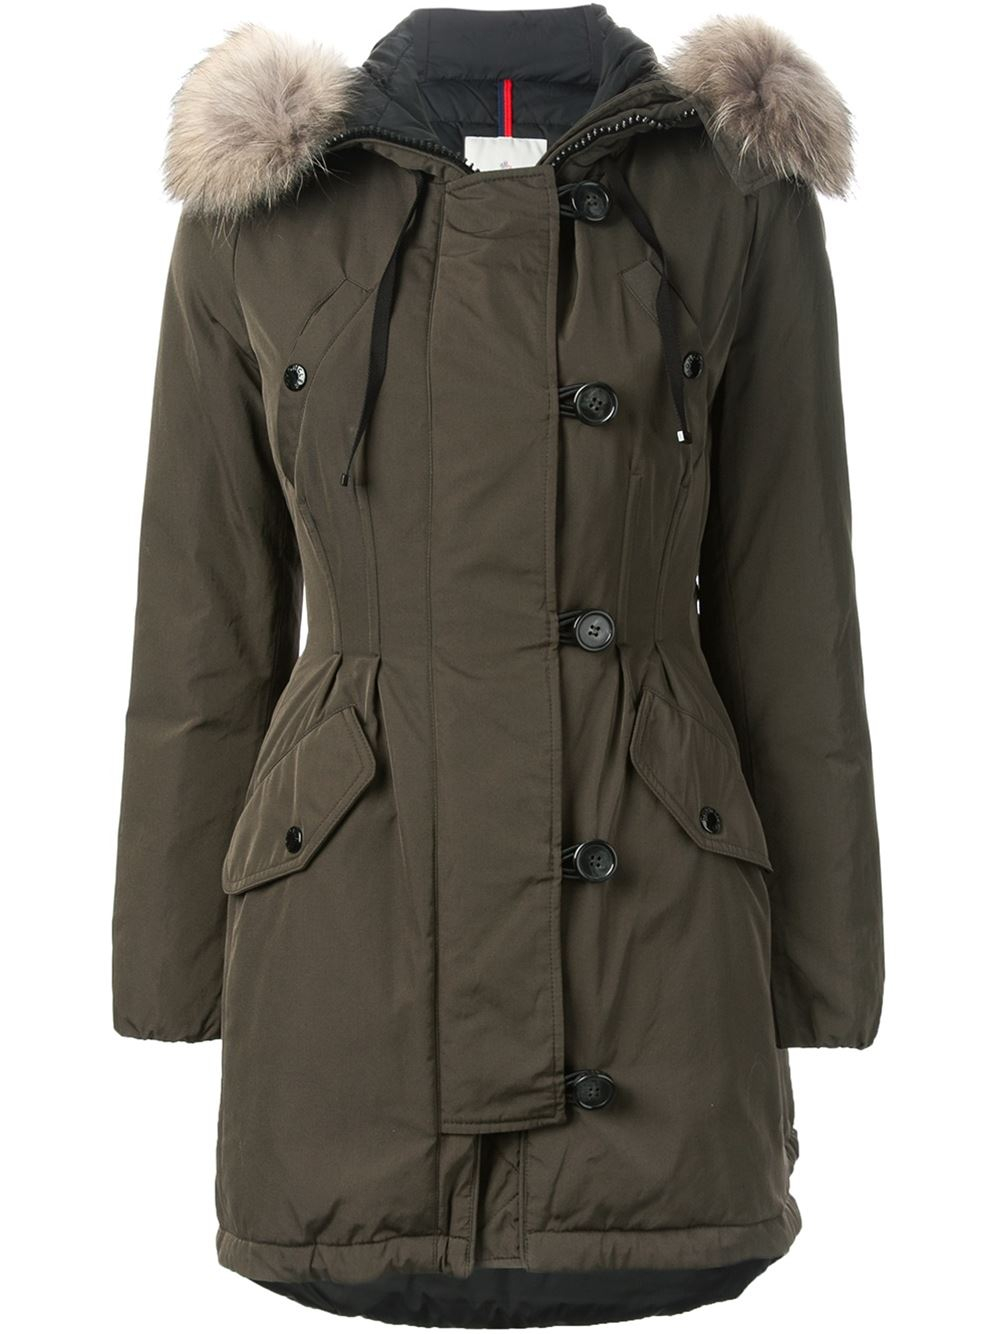 Lyst - Moncler Arrious Padded Parka in Green